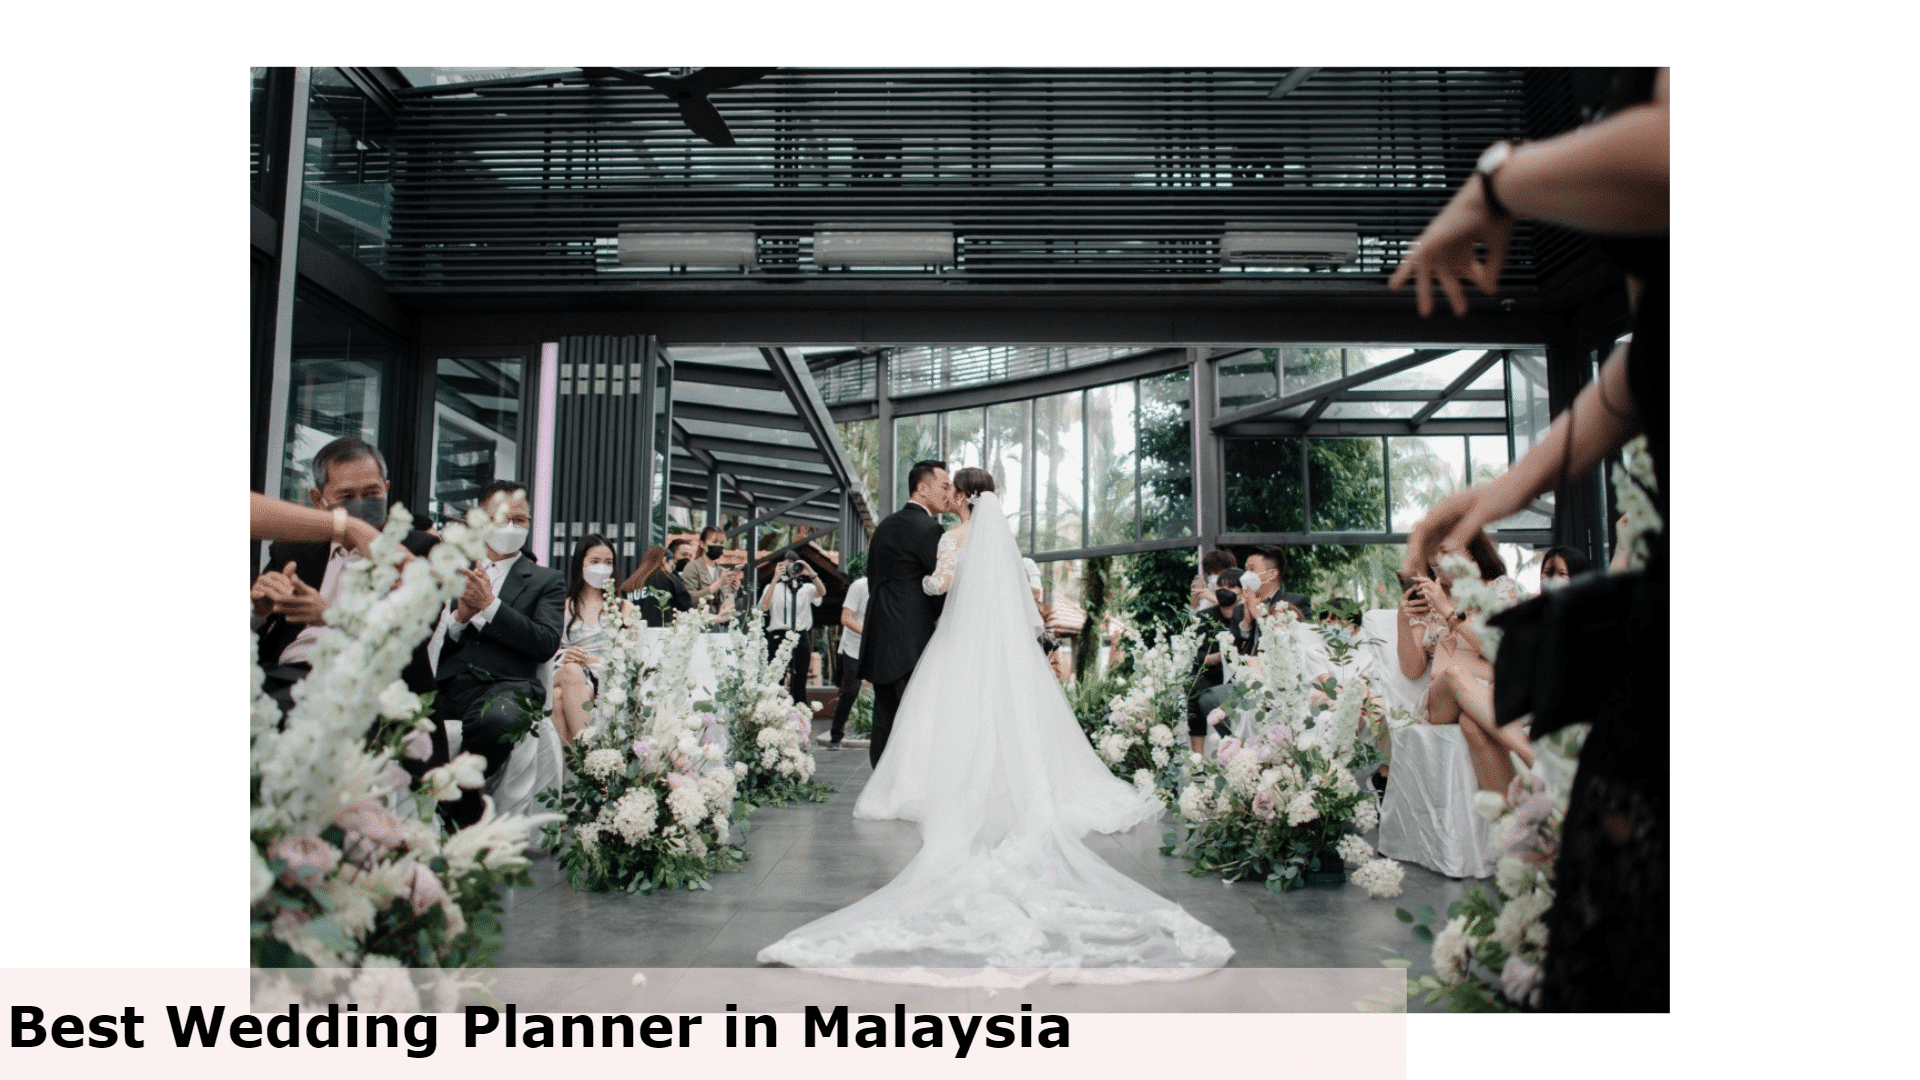 MY Wedding Planner - Best Wedding Planner in Malaysia, Wedding Planner Malaysia, How much do wedding planners cost Malaysia?, Popular Wedding Planners in Malaysia for a Stress-Free Wedding, Is it worth it to pay for a wedding planner?, How do I plan a wedding in Malaysia?, What are the steps to planning a wedding?, best wedding planner malaysia, wedding planner malaysia price, 
wedding planner malaysia pdf, wedding planner package selangor, 
wedding planner checklist malaysia, indian wedding planner malaysia, wedding planner package kuala lumpur, malay wedding planner kl, Free Malay Wedding Planner Checklist,